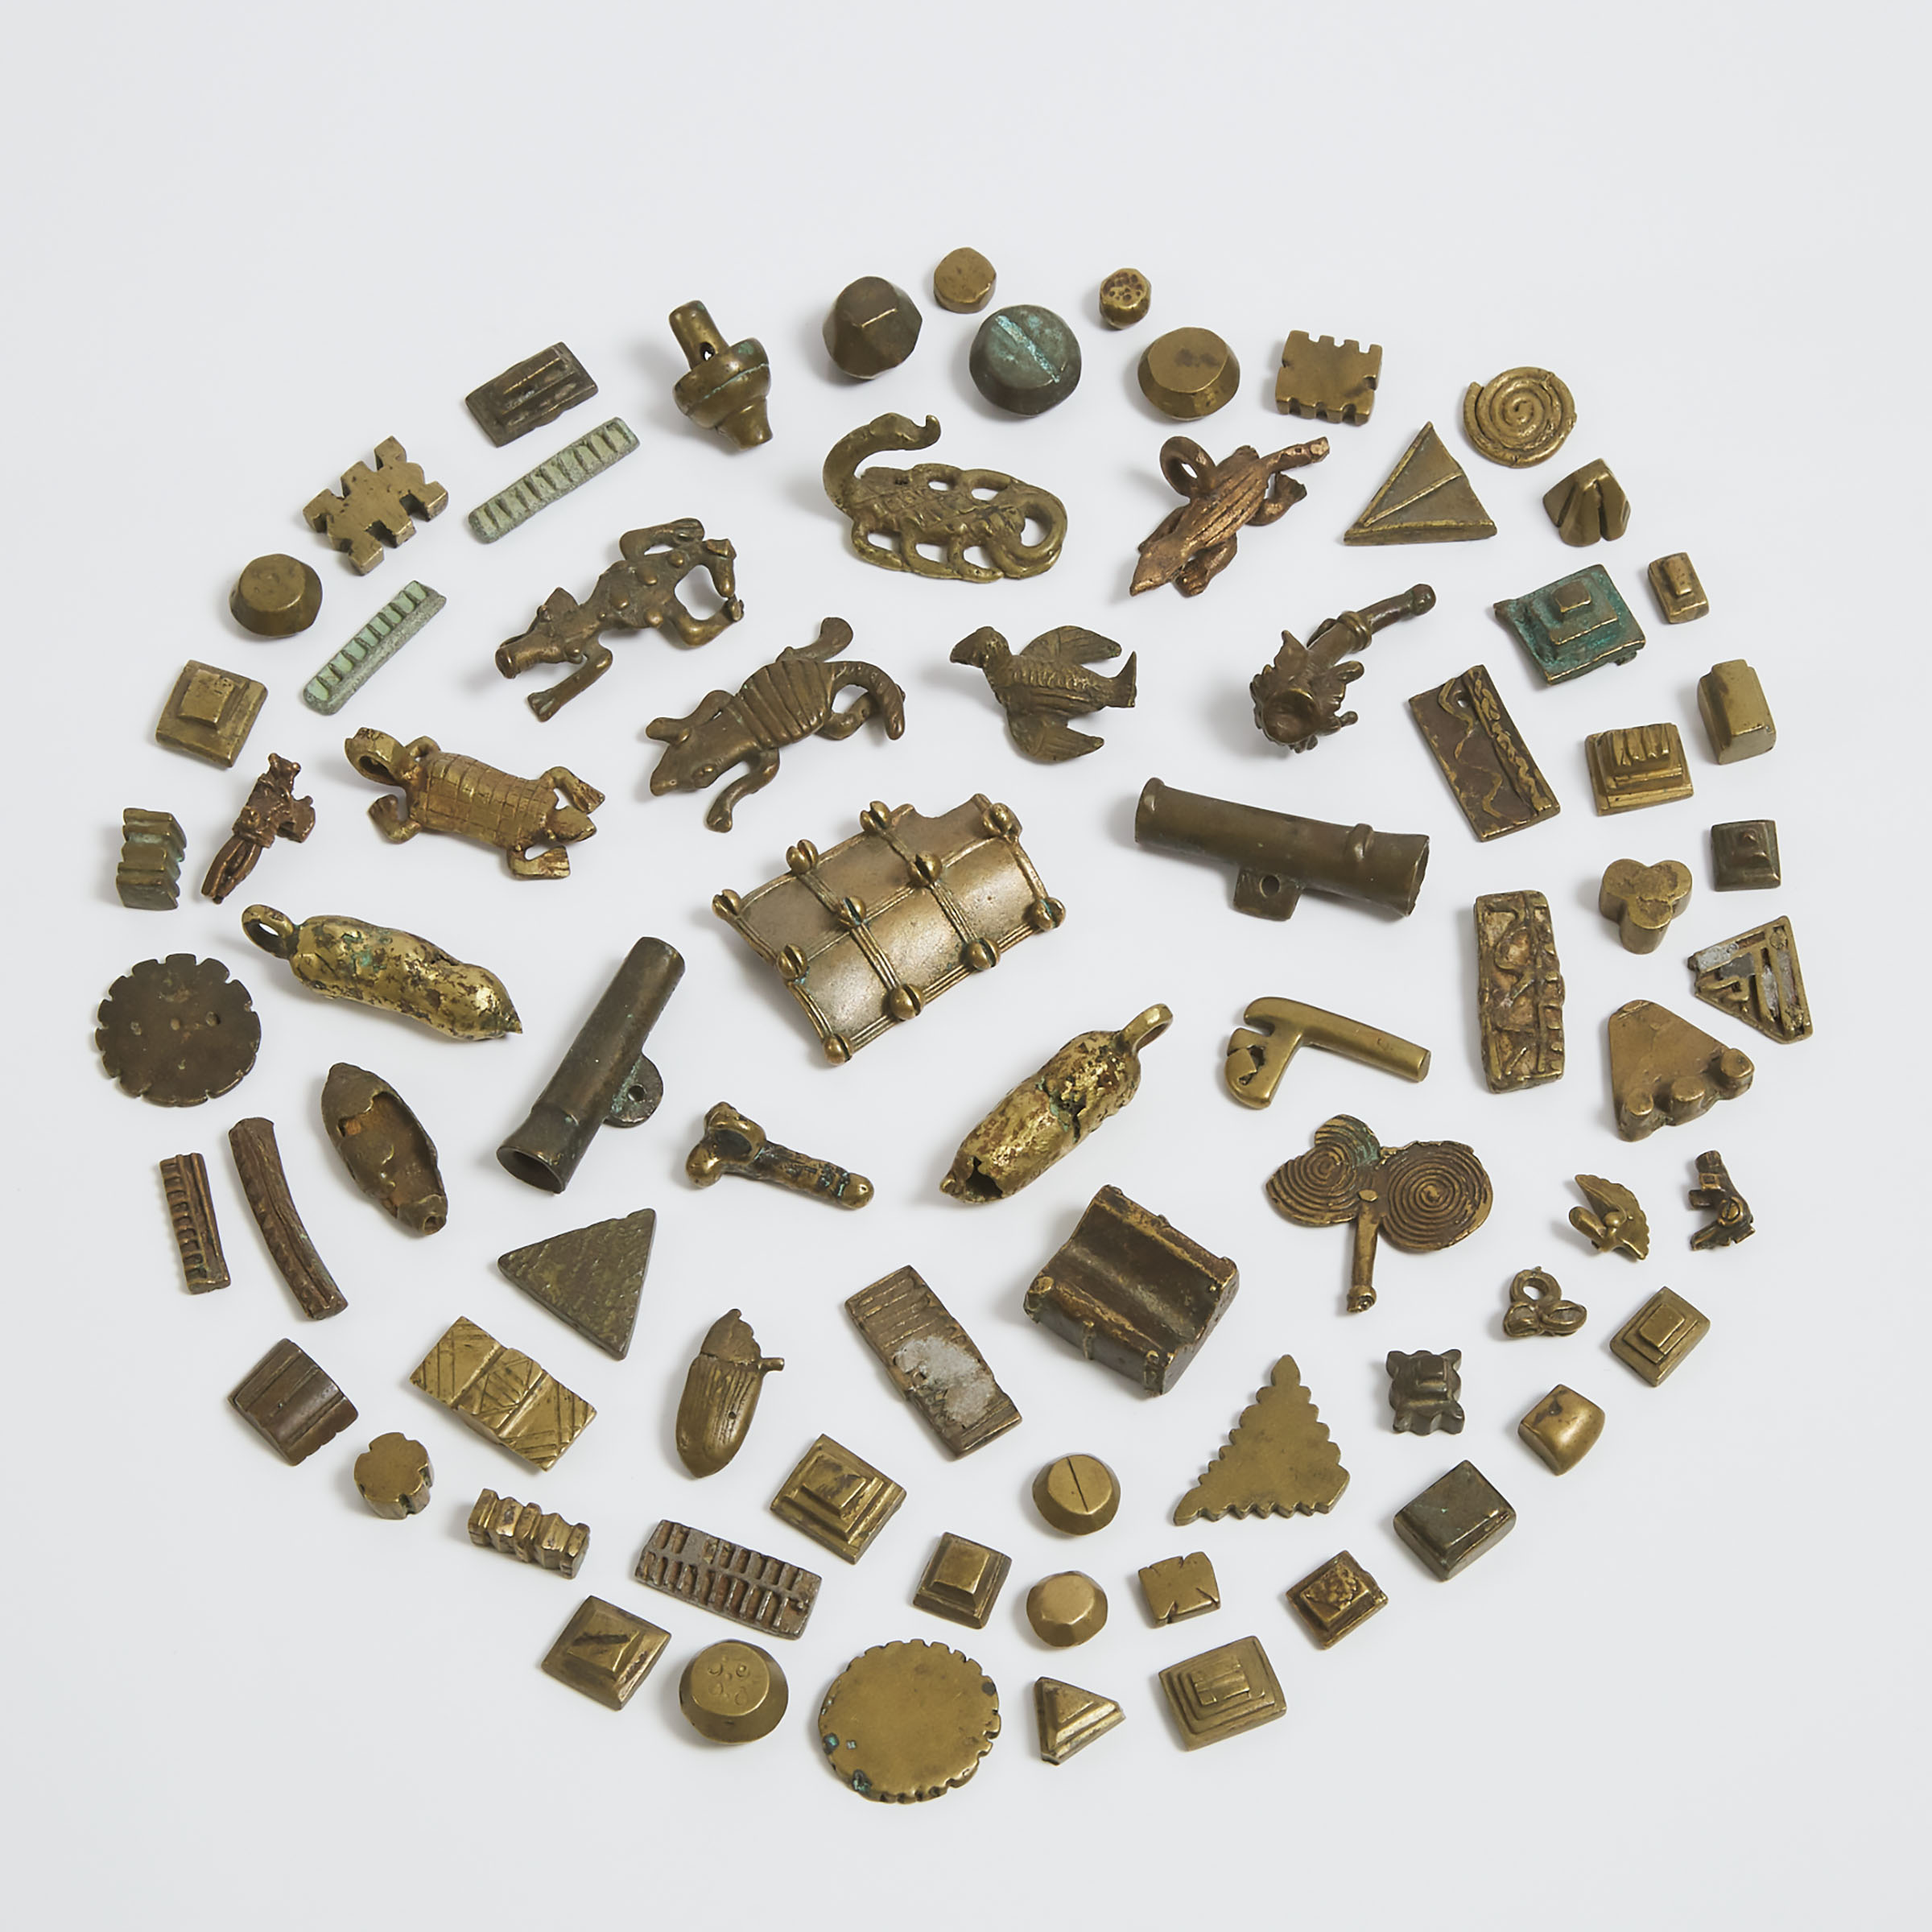 Group of 75 Akan Goldweights and Pendants, Ghana, West Africa, 19th/20th century